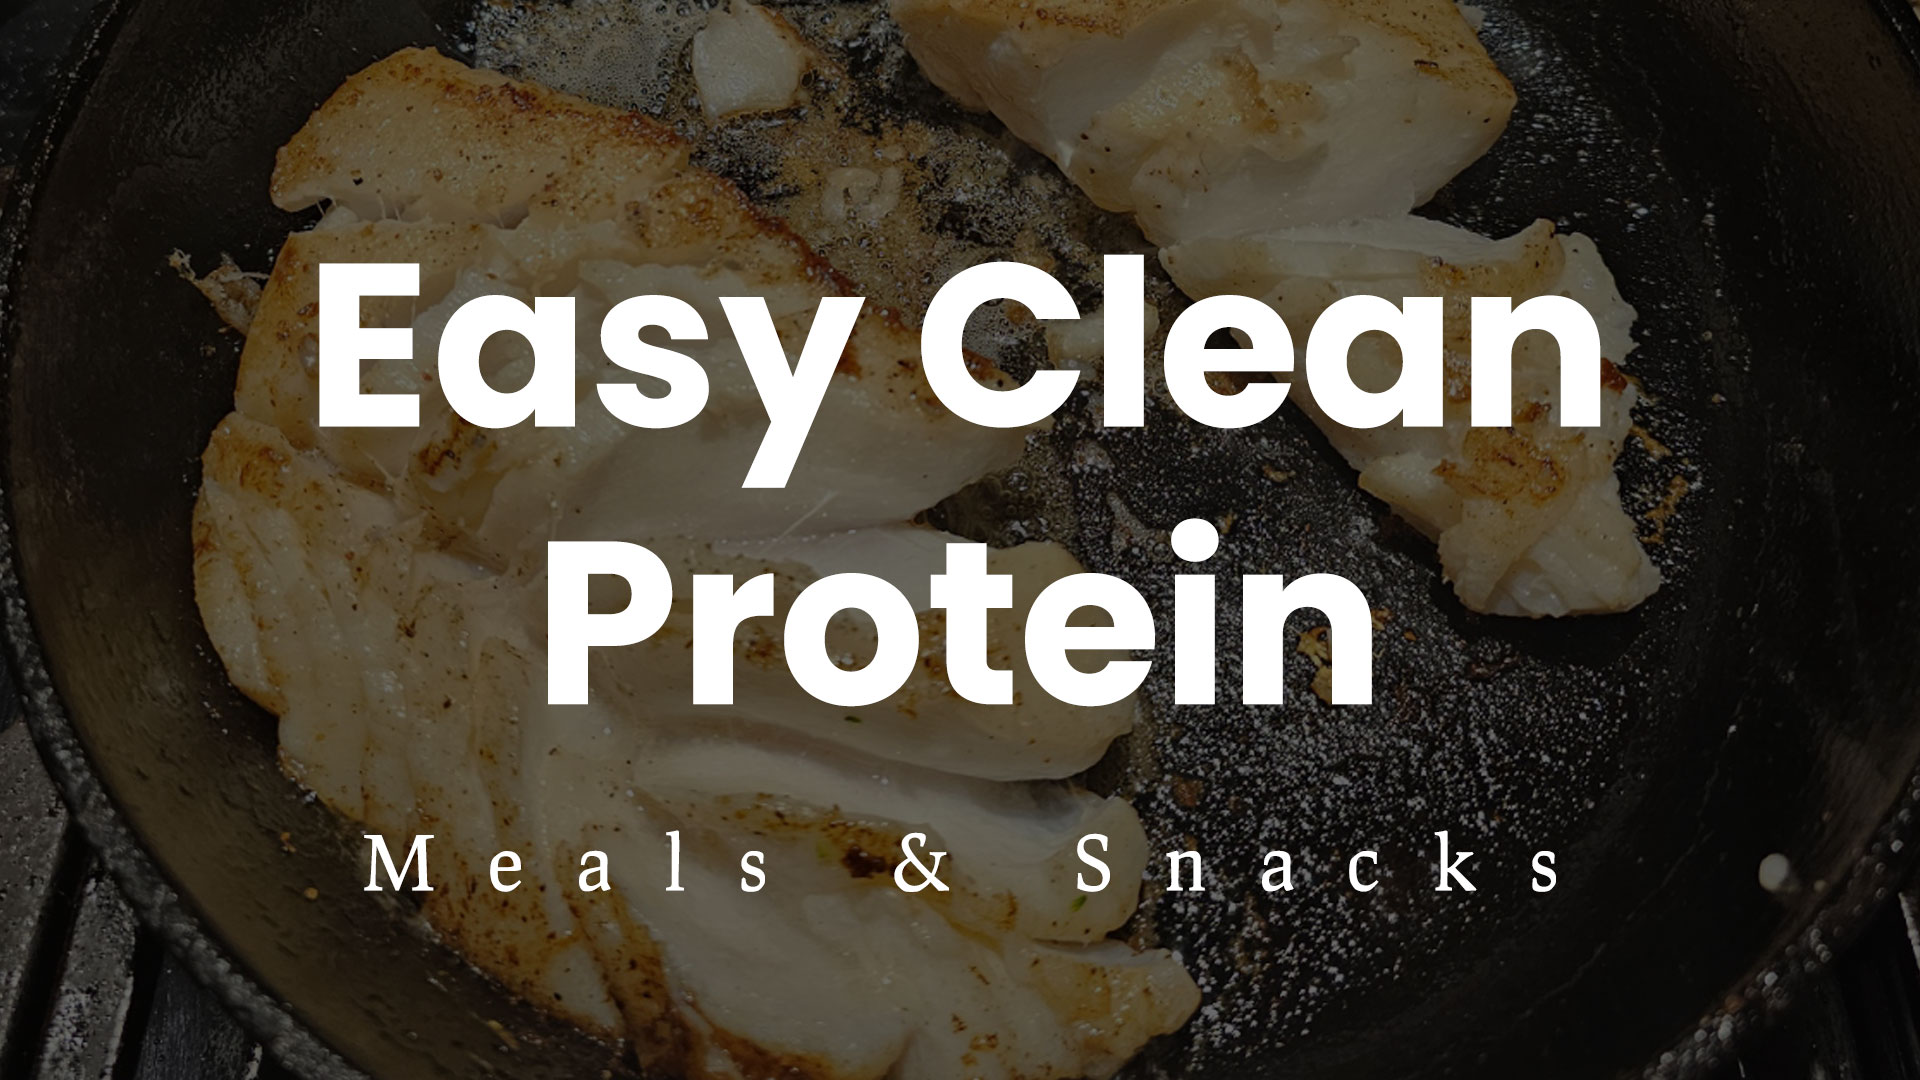 Featured image for “Easy High Protein Clean, Lean 40+ Grams Per Meal Ideas”